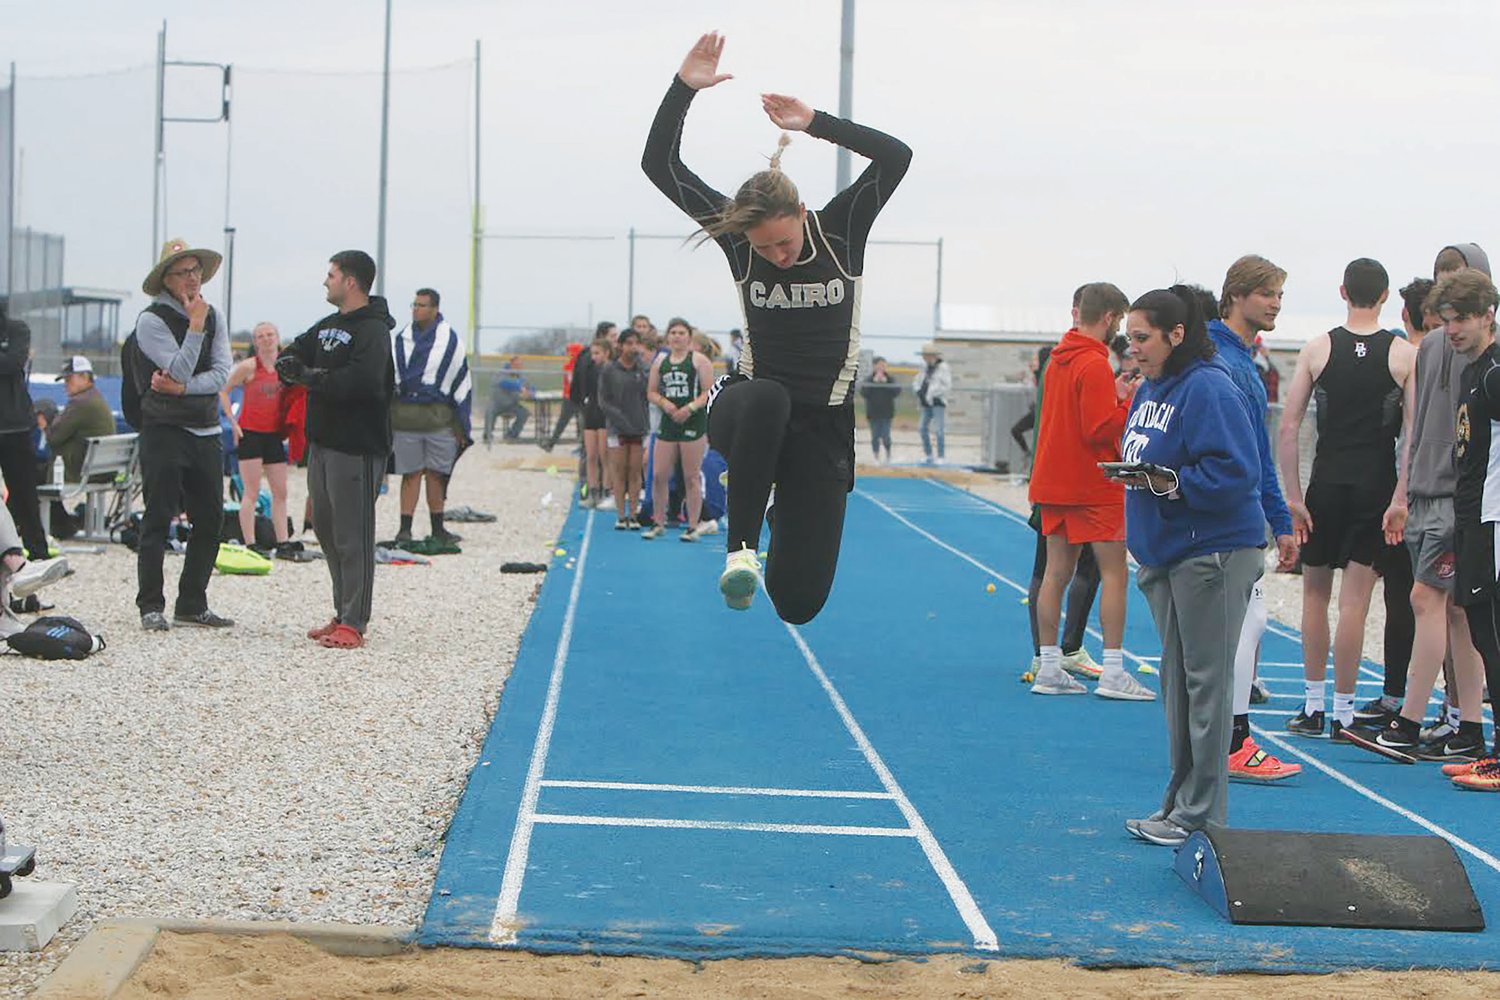 Cairo’s Avery Wiegand competes in the long jump at the Montgomery County Invitational on April 19. Wiegand placed 10th overall with a jump of 4.43 meters.